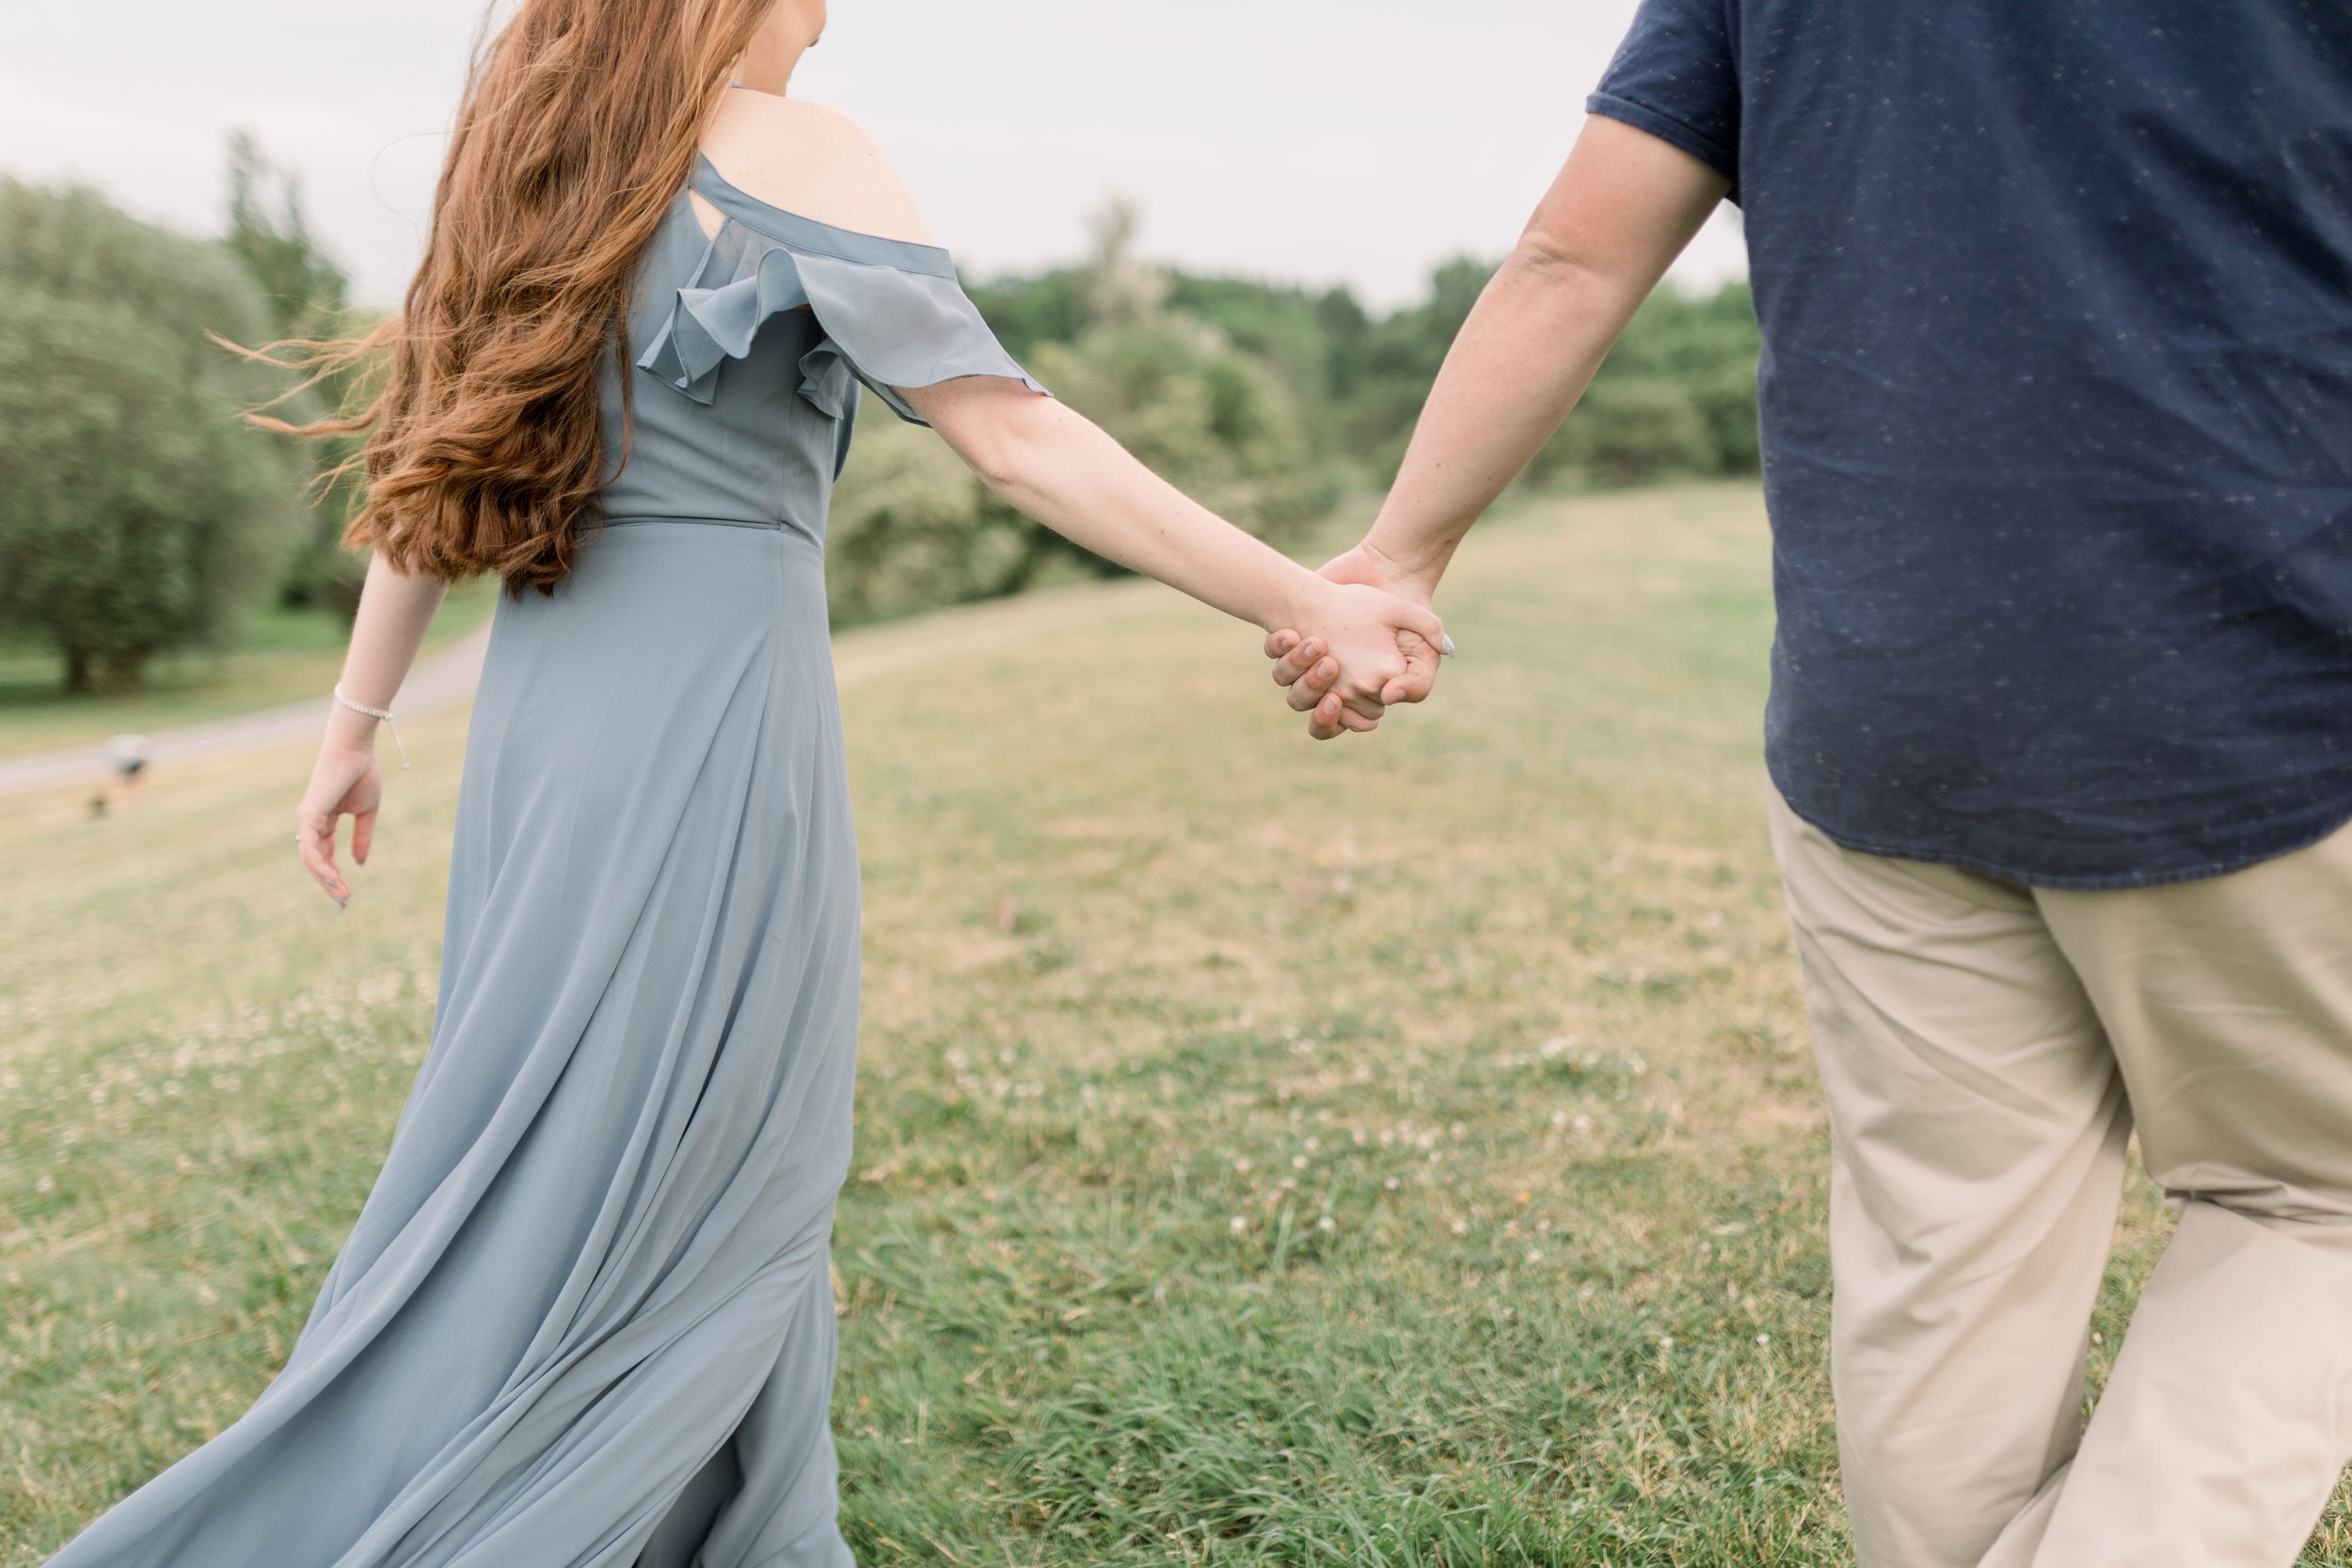  Detailed engagement picture of a man and woman holding hands in a grass field by Chelsea Mason Photography. outdoor wedding announcement pic #chelseamasonphotography #chelseamasonengagements #Ottawaengagements #DominonArboretum #Ottawaphotographers&